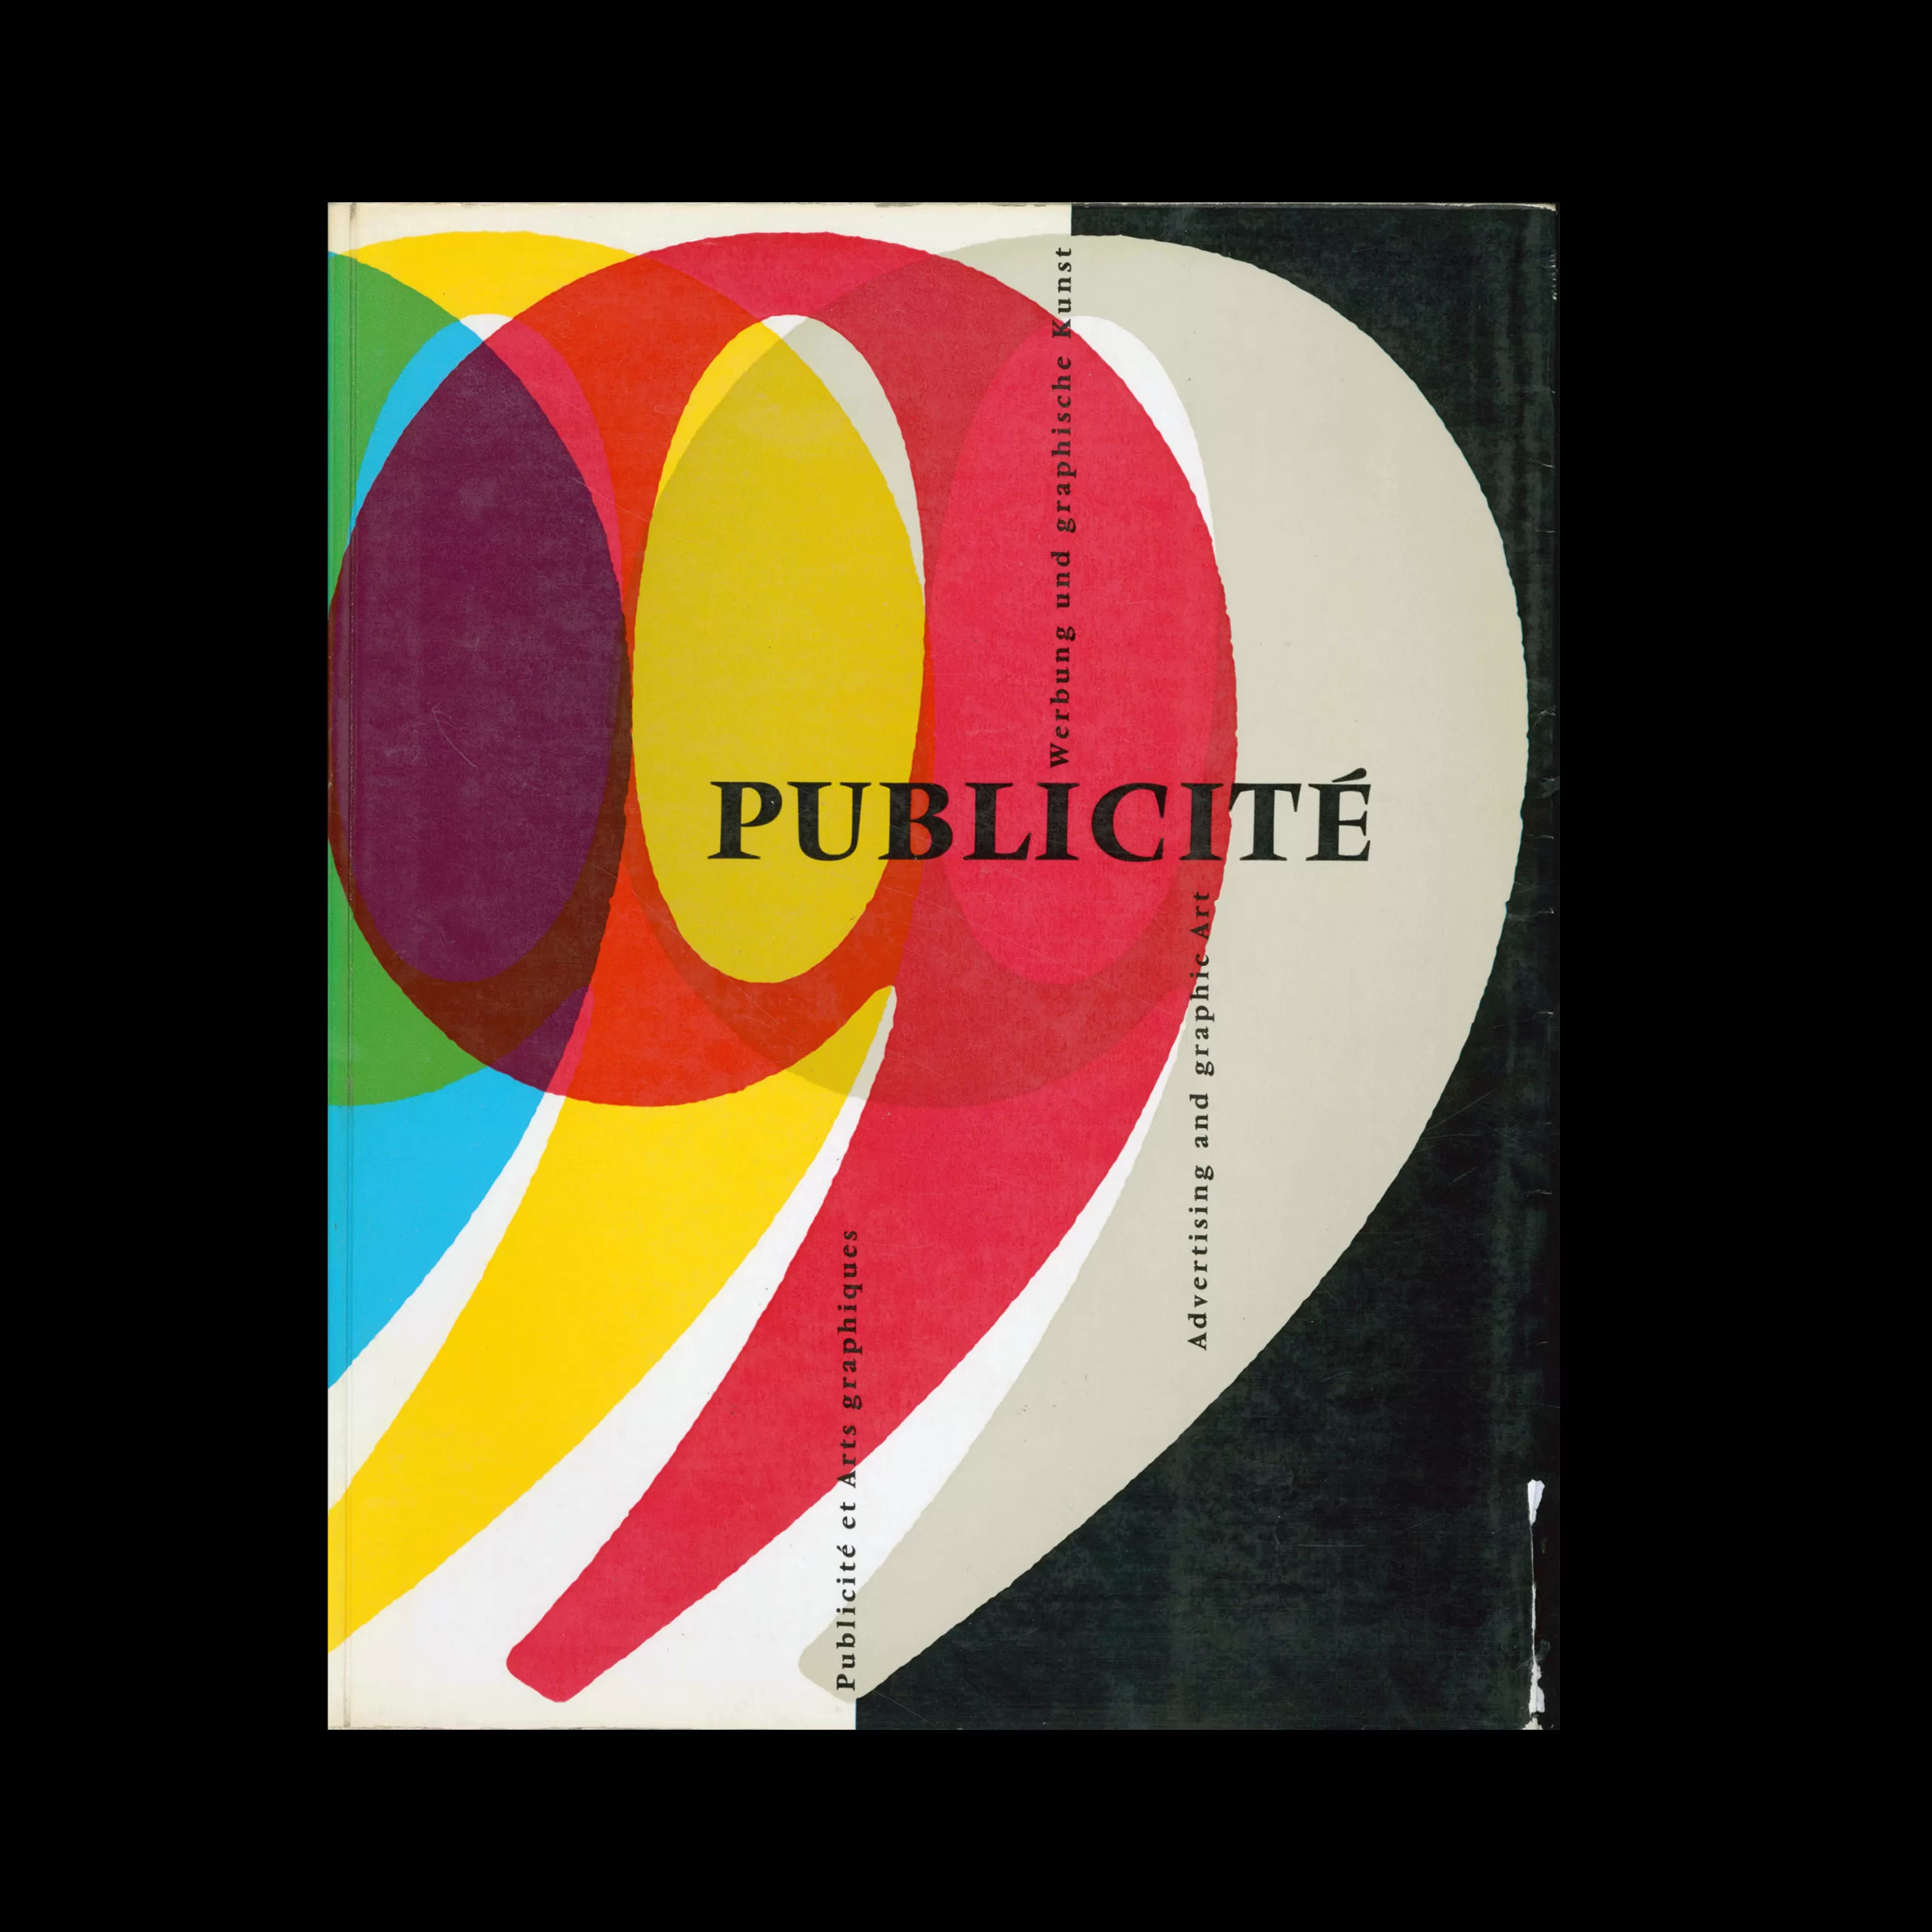 Publicité 9, Review of advertising and Graphic Art in Switzerland, 1957